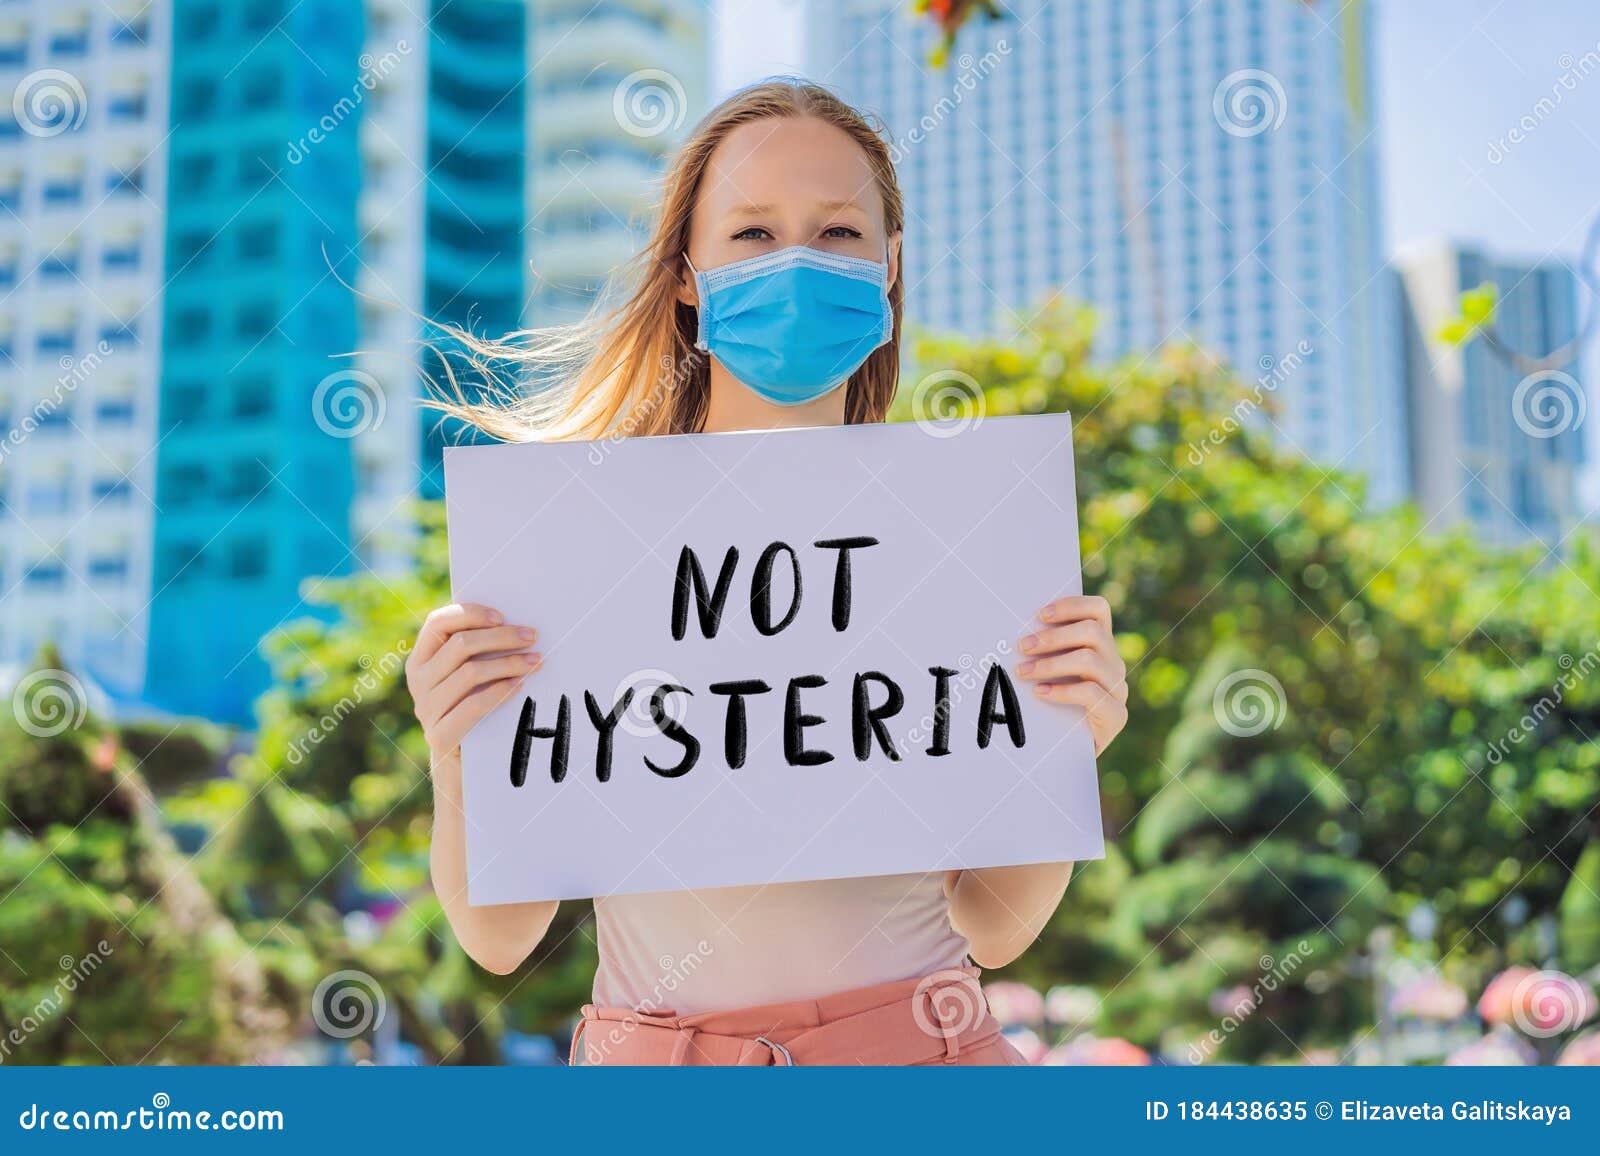 woman in medical mask prevents coronavirus disease holds a poster not histeria hand written text - lettering  on